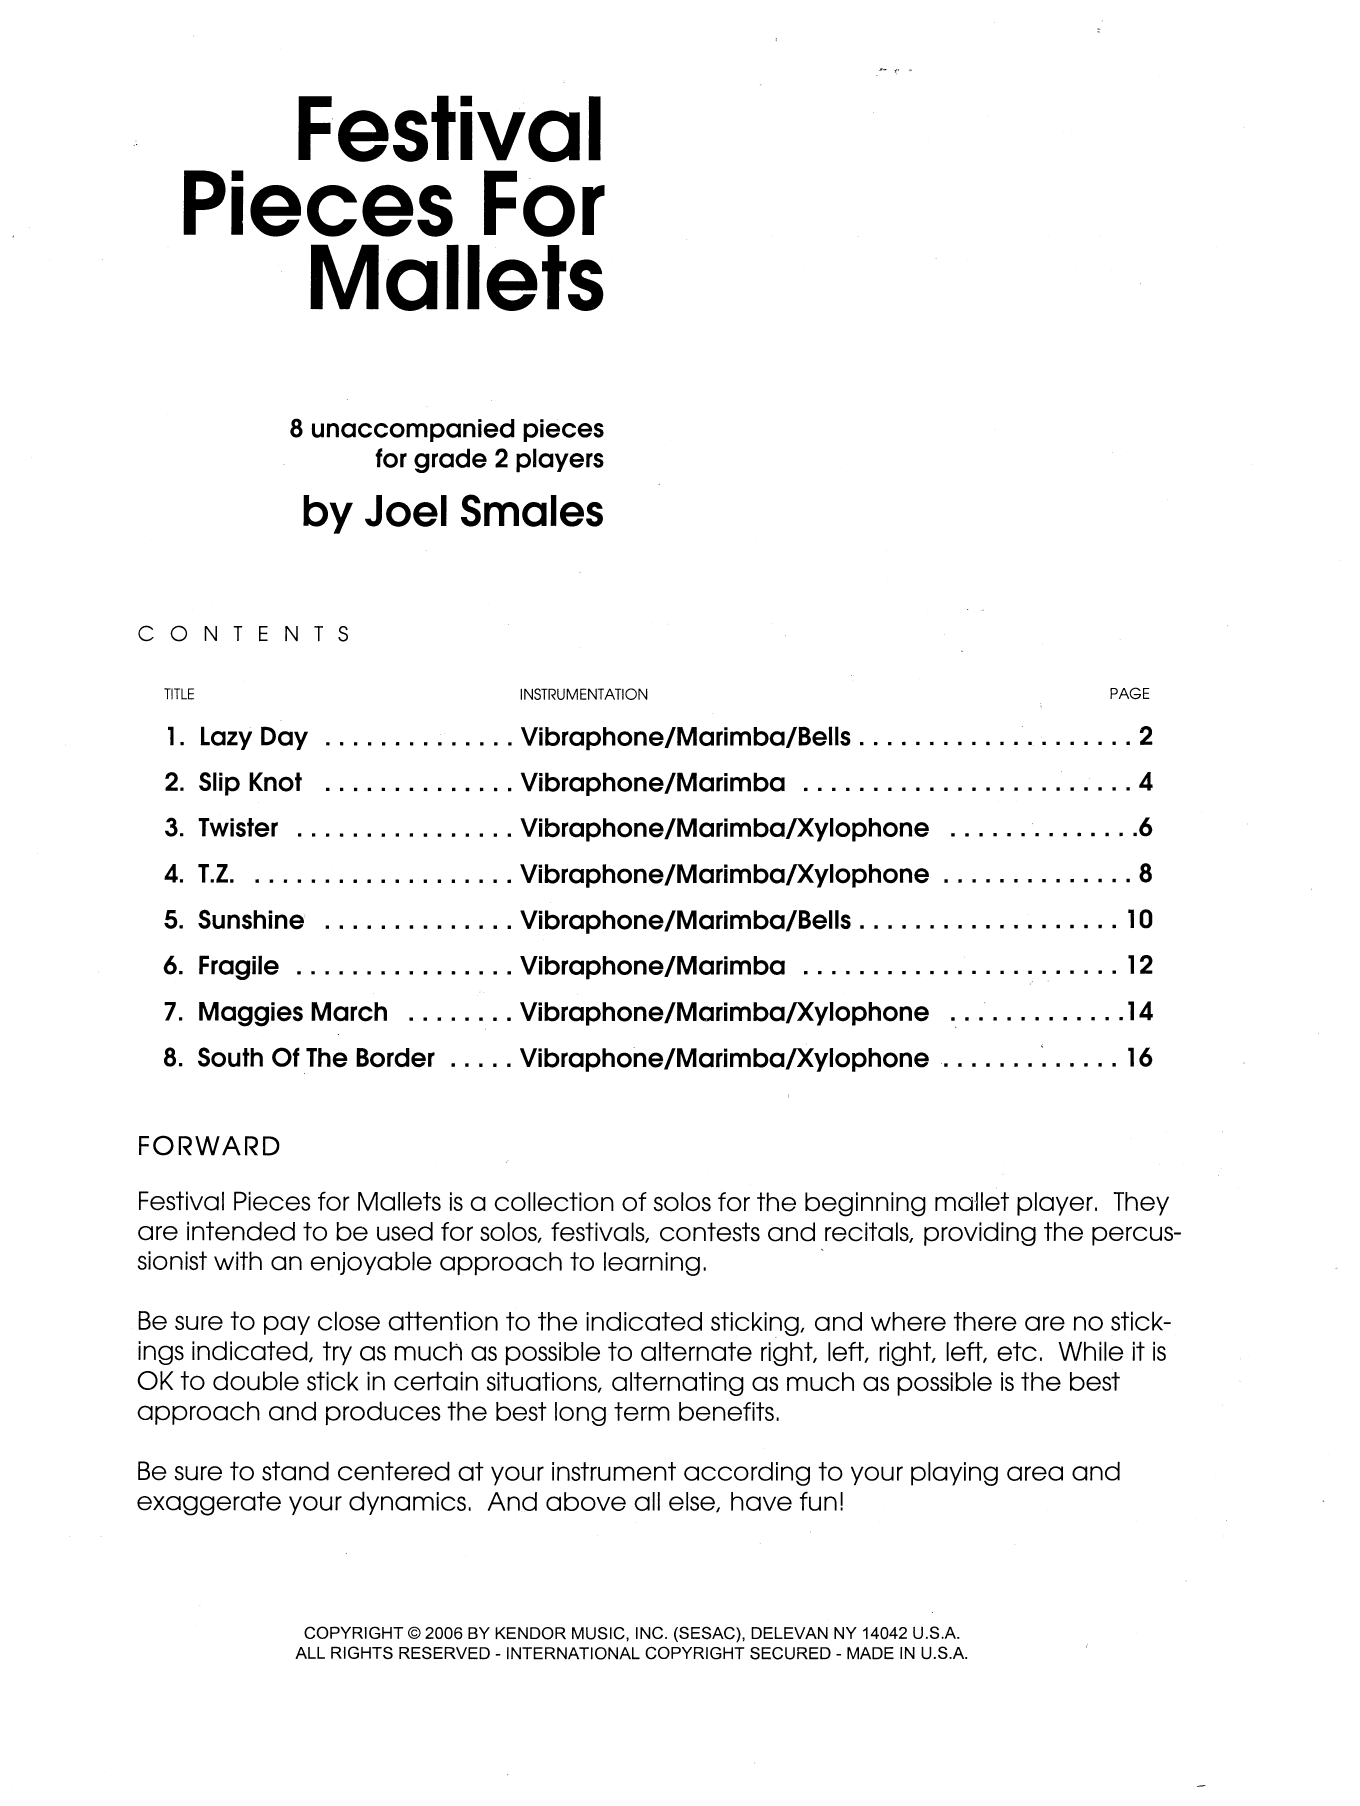 Download Joel Smales Festival Pieces For Mallets Sheet Music